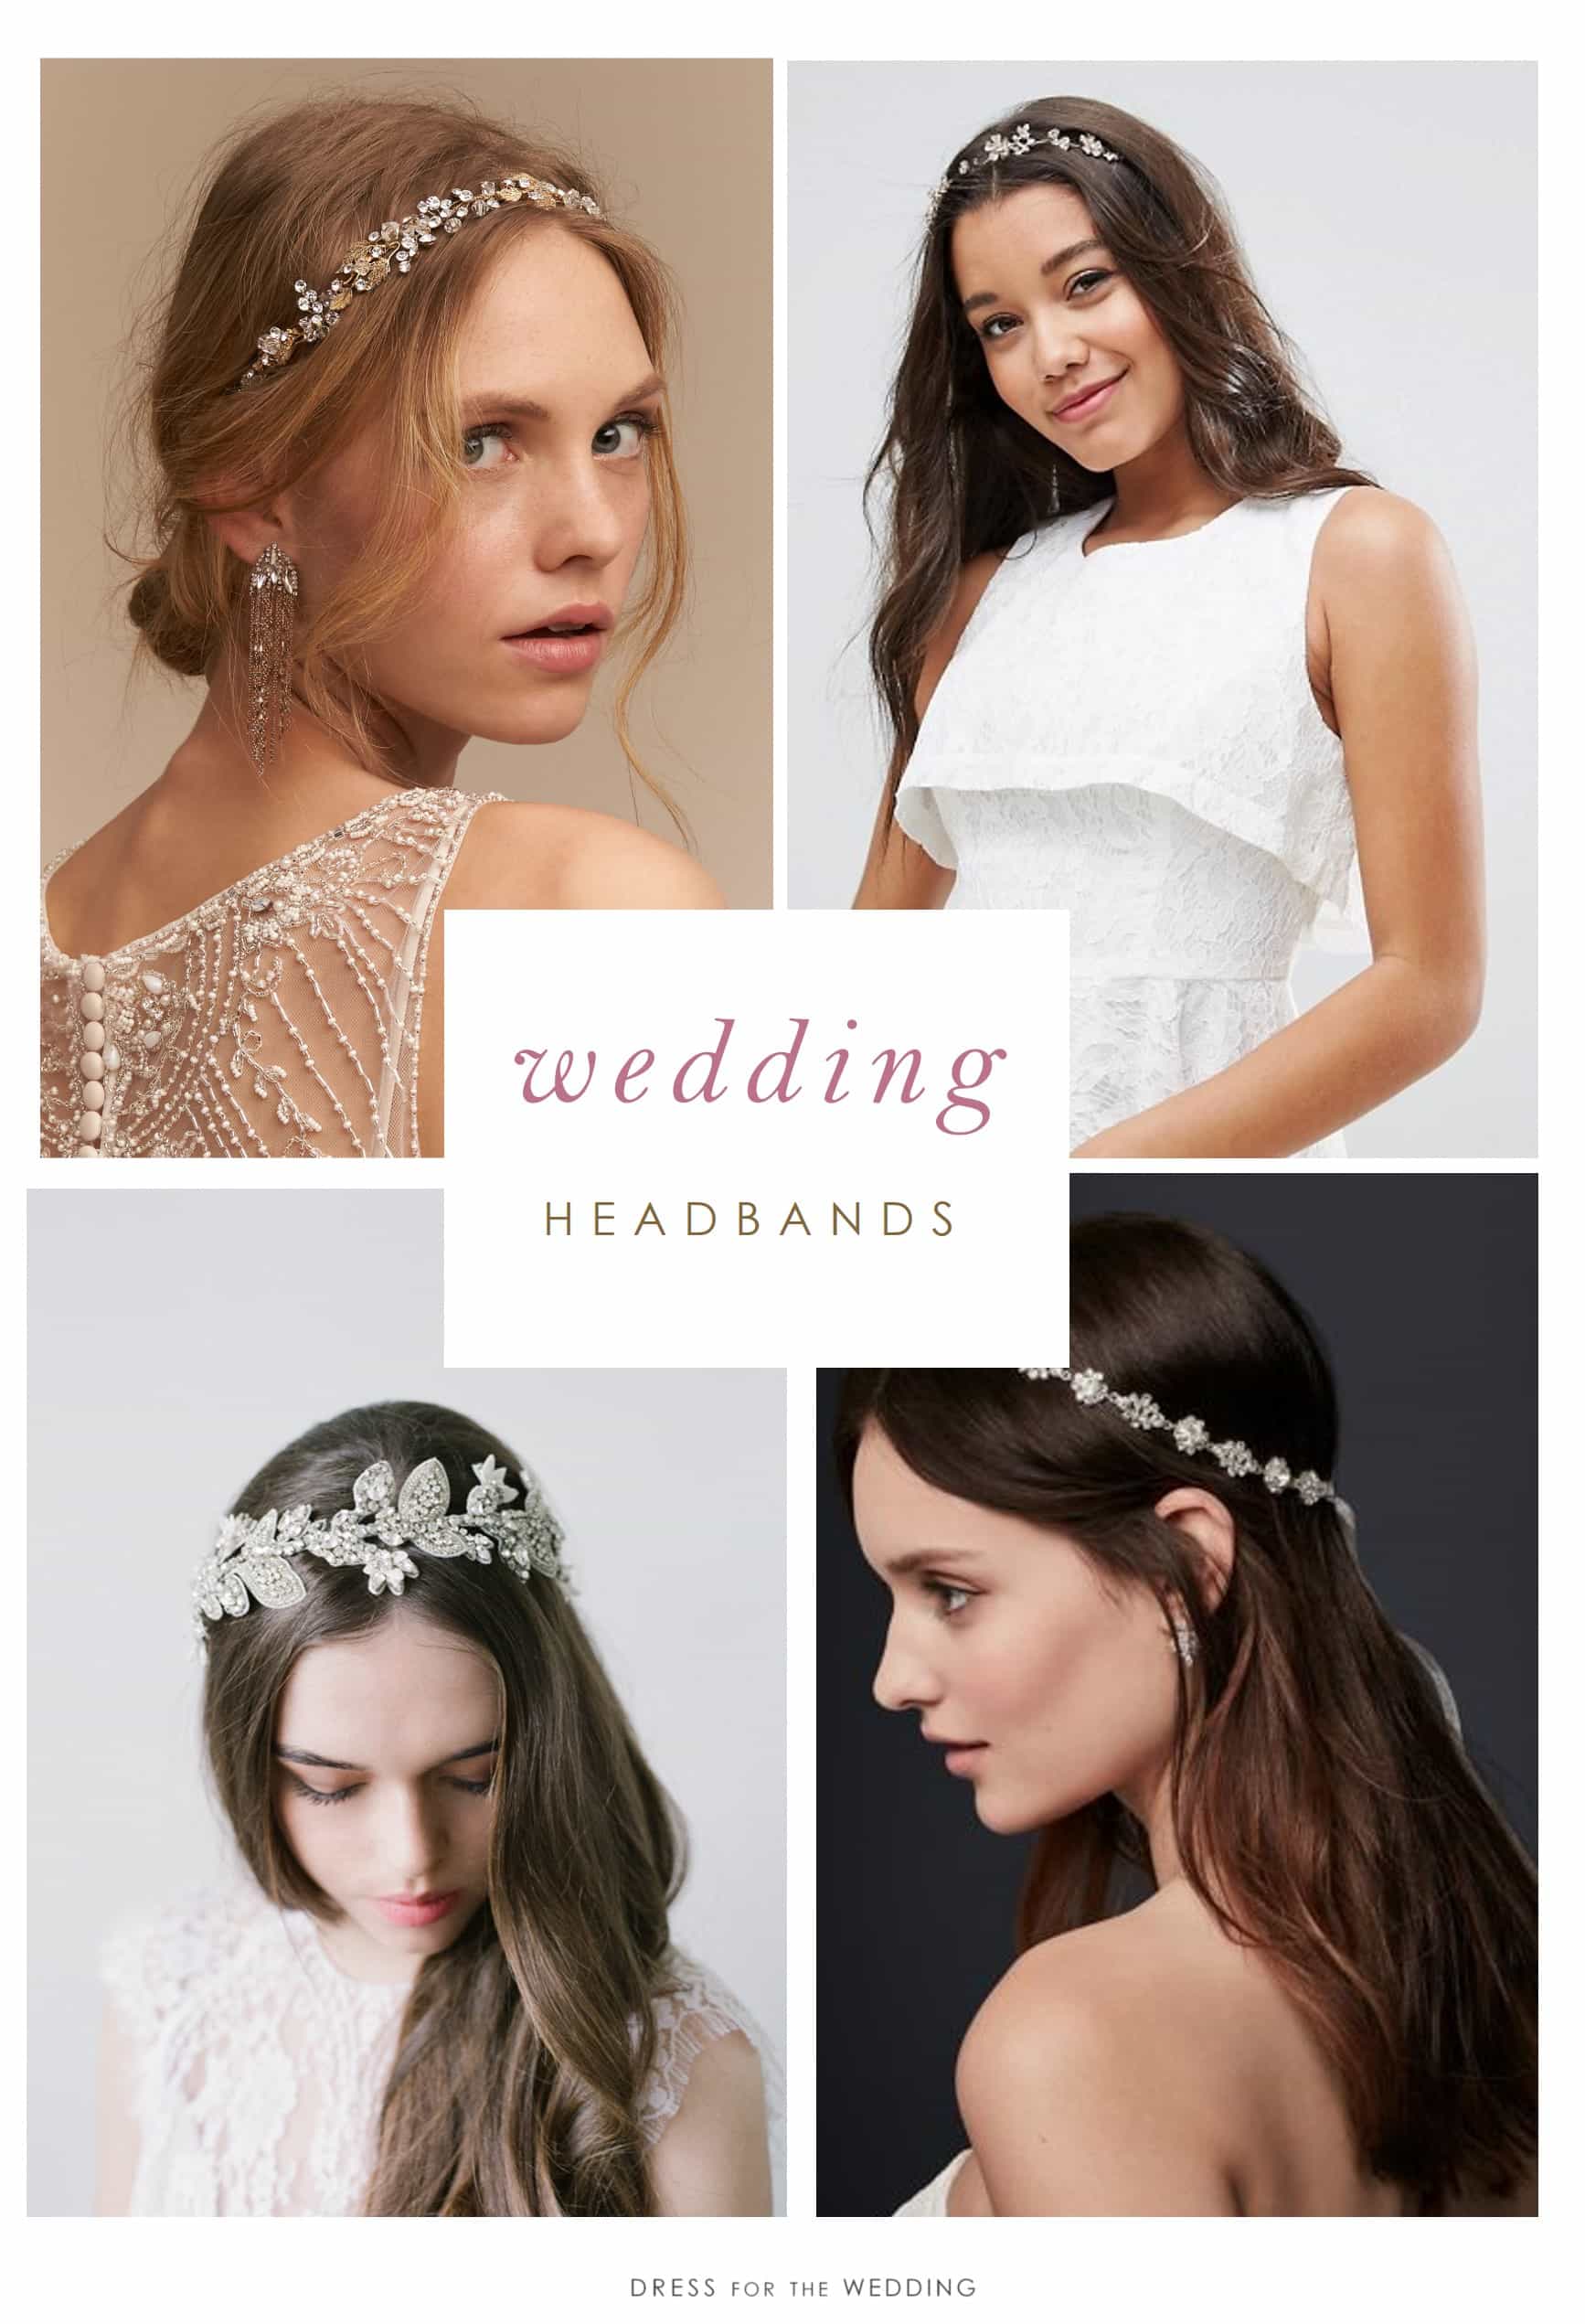 Bridal Headbands for Gorgeous Wedding Hairstyles  Dress for the Wedding